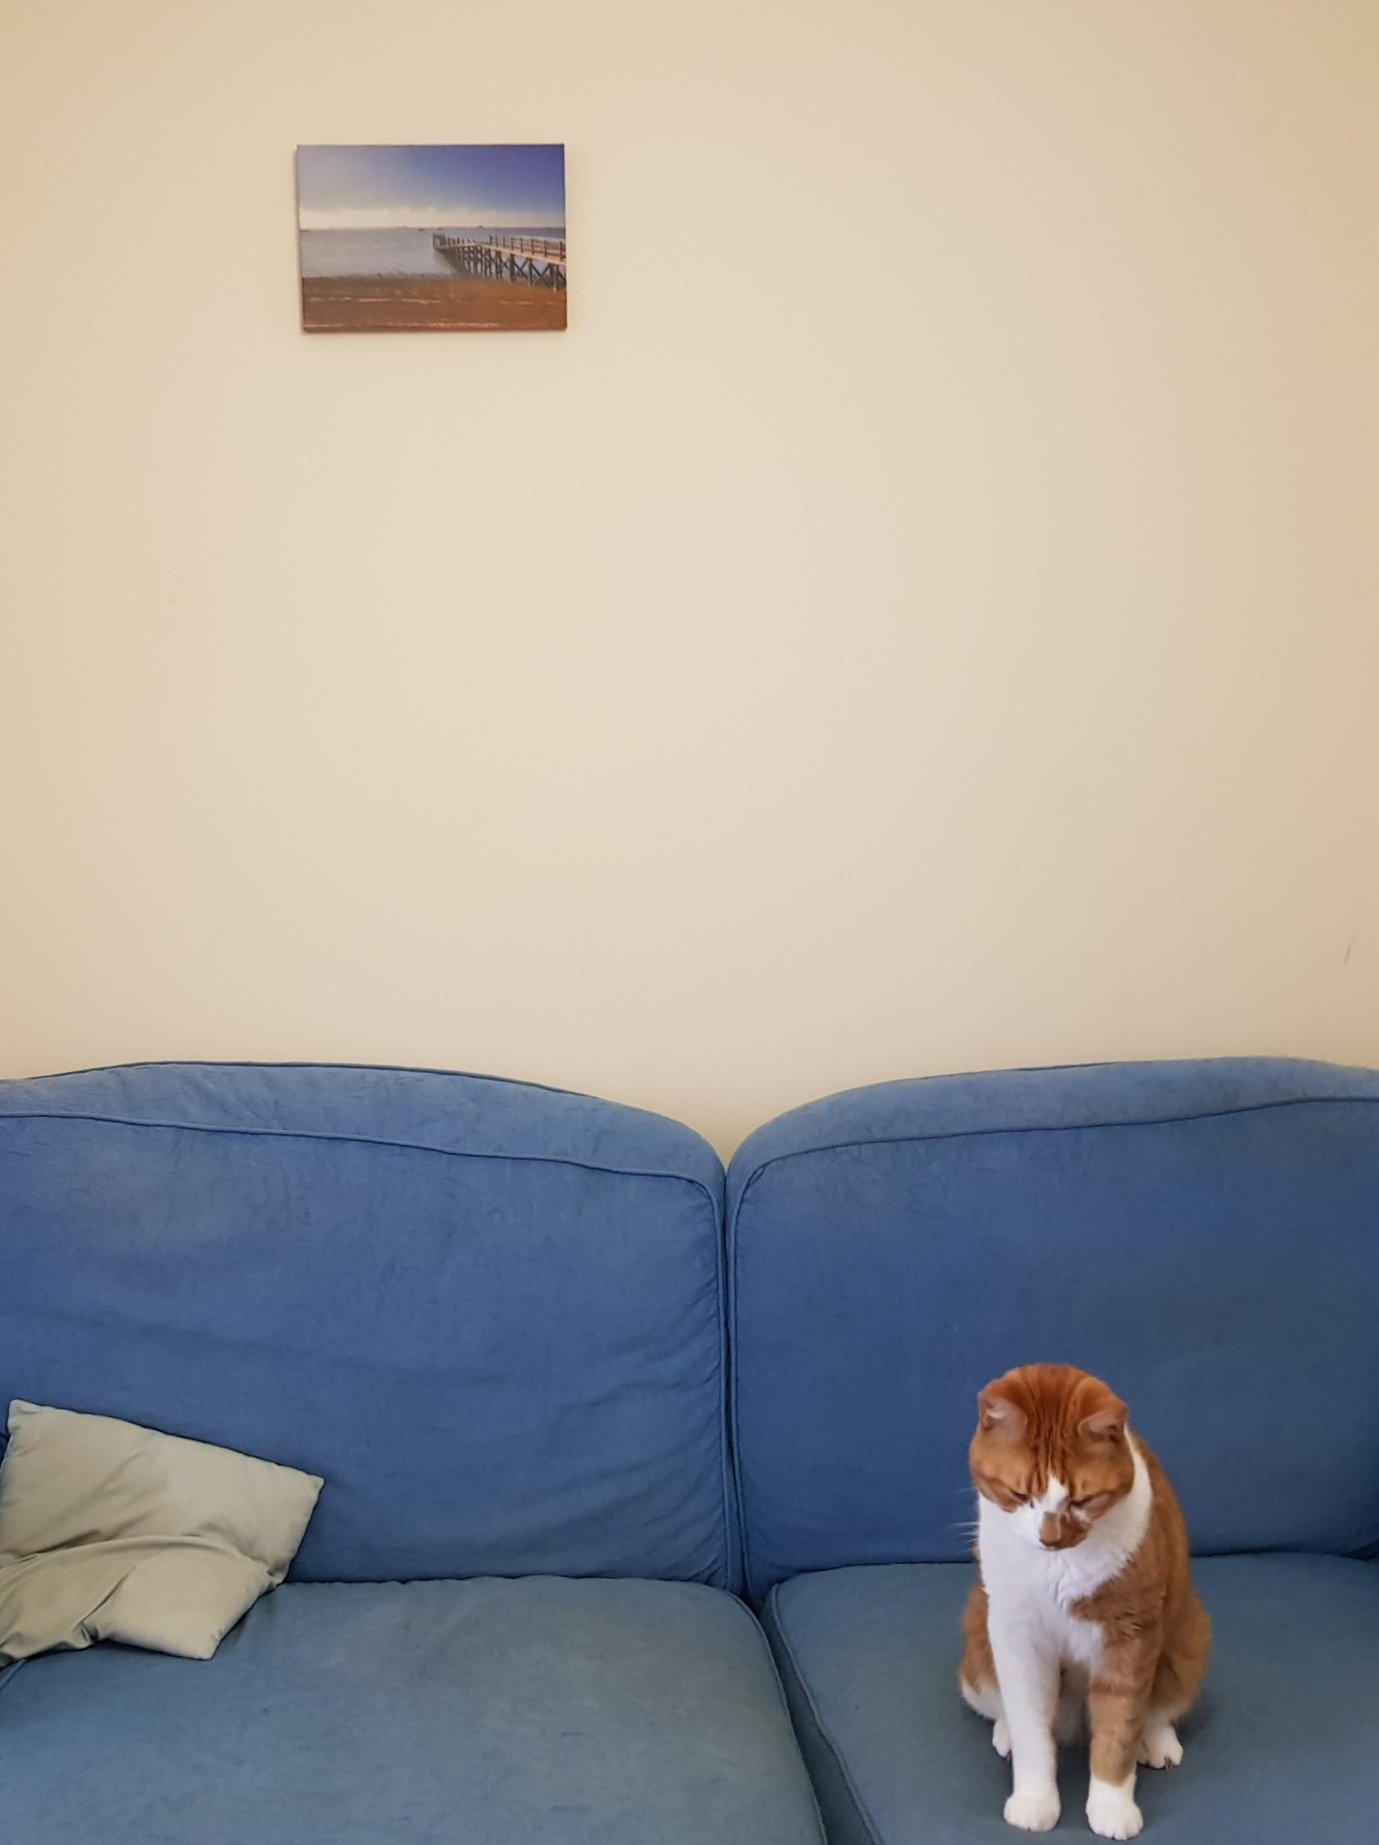 Canvas on wall. Matches colour scheme. A well coordinated cat is sat on the sofa too, also matching the canvas art!